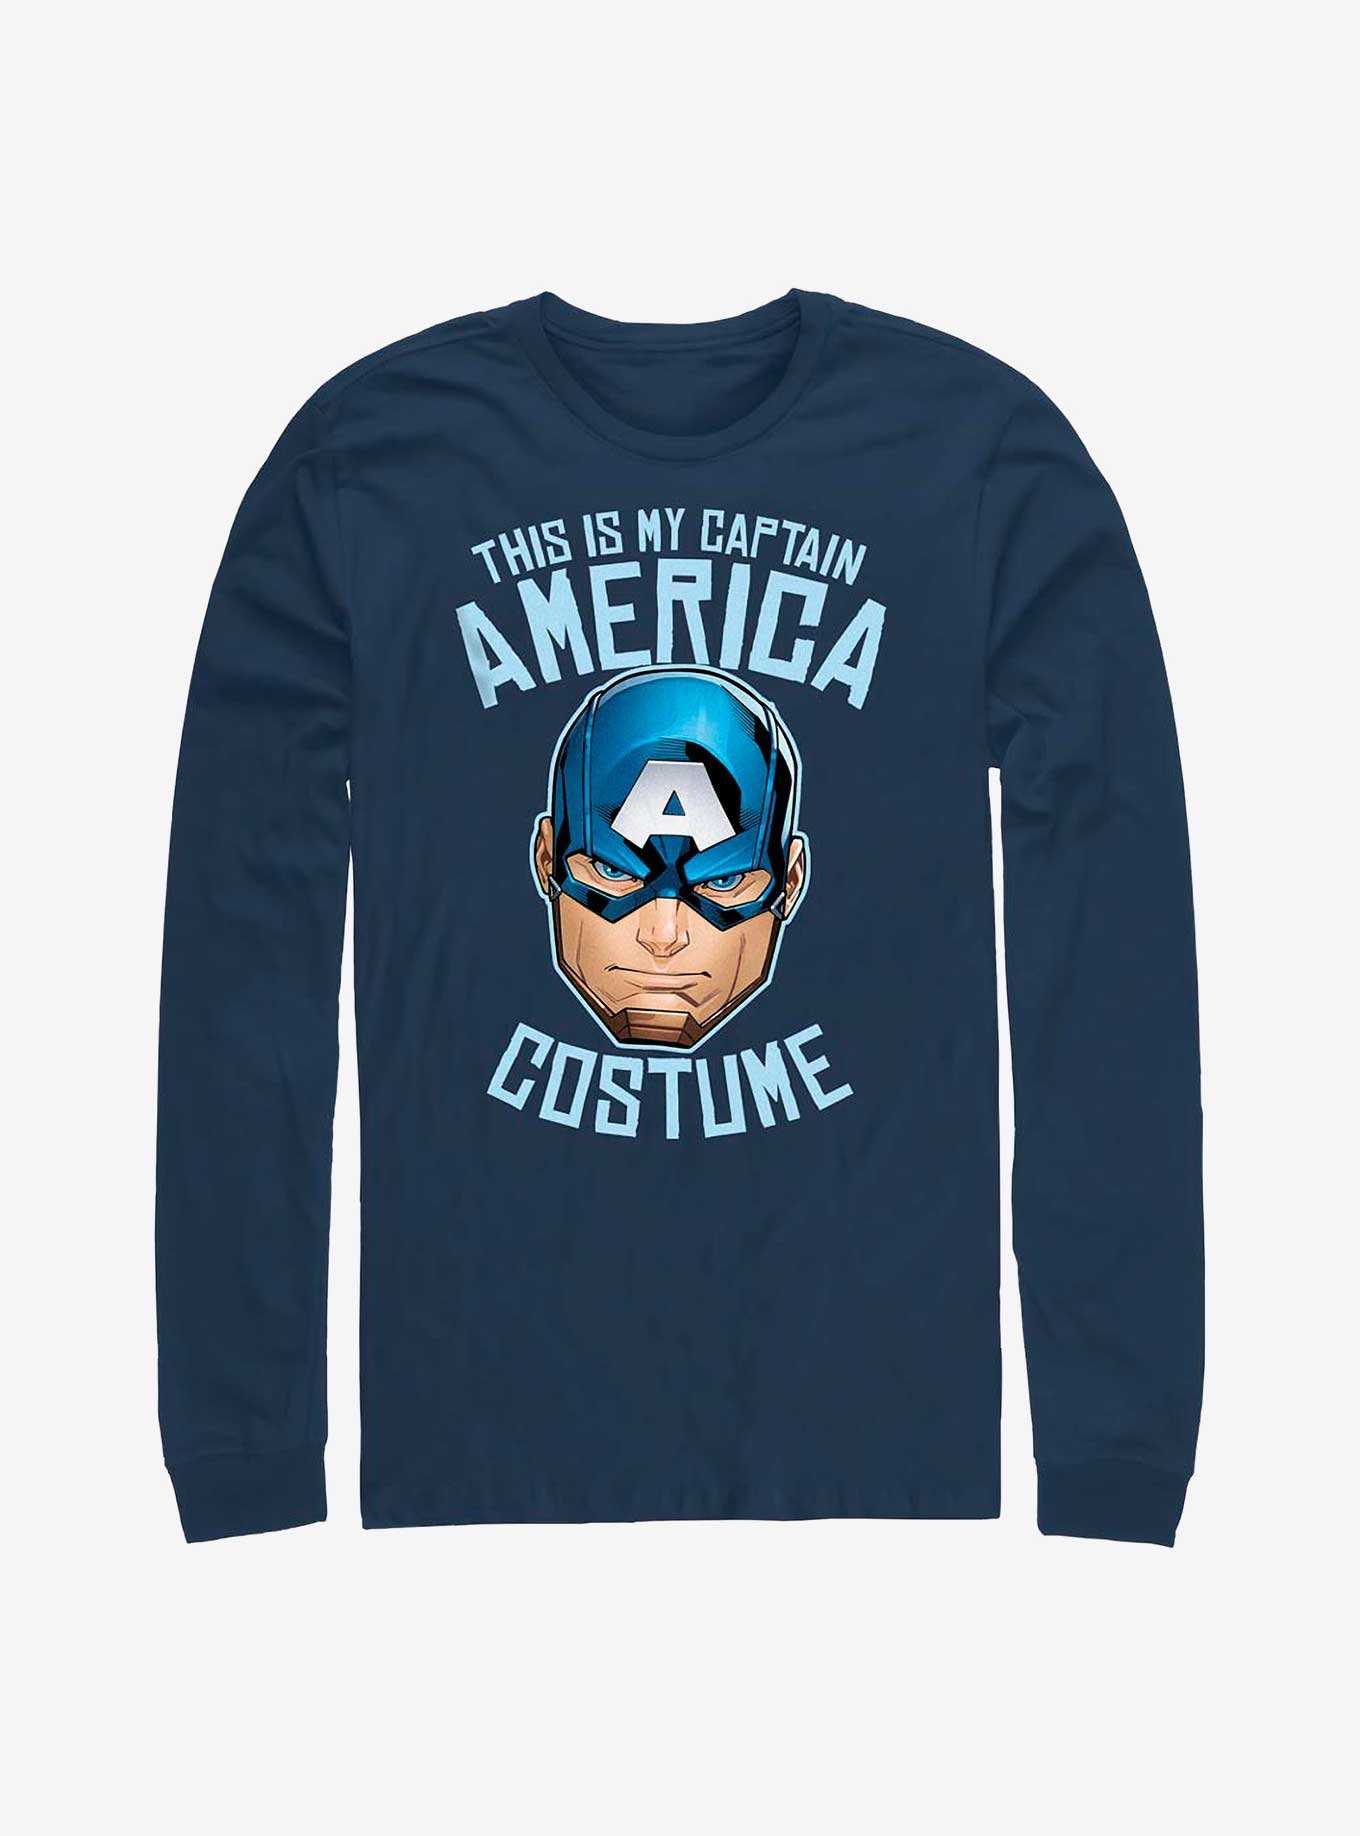 Marvel Captain America This Is My Costume Long-Sleeve T-Shirt, , hi-res